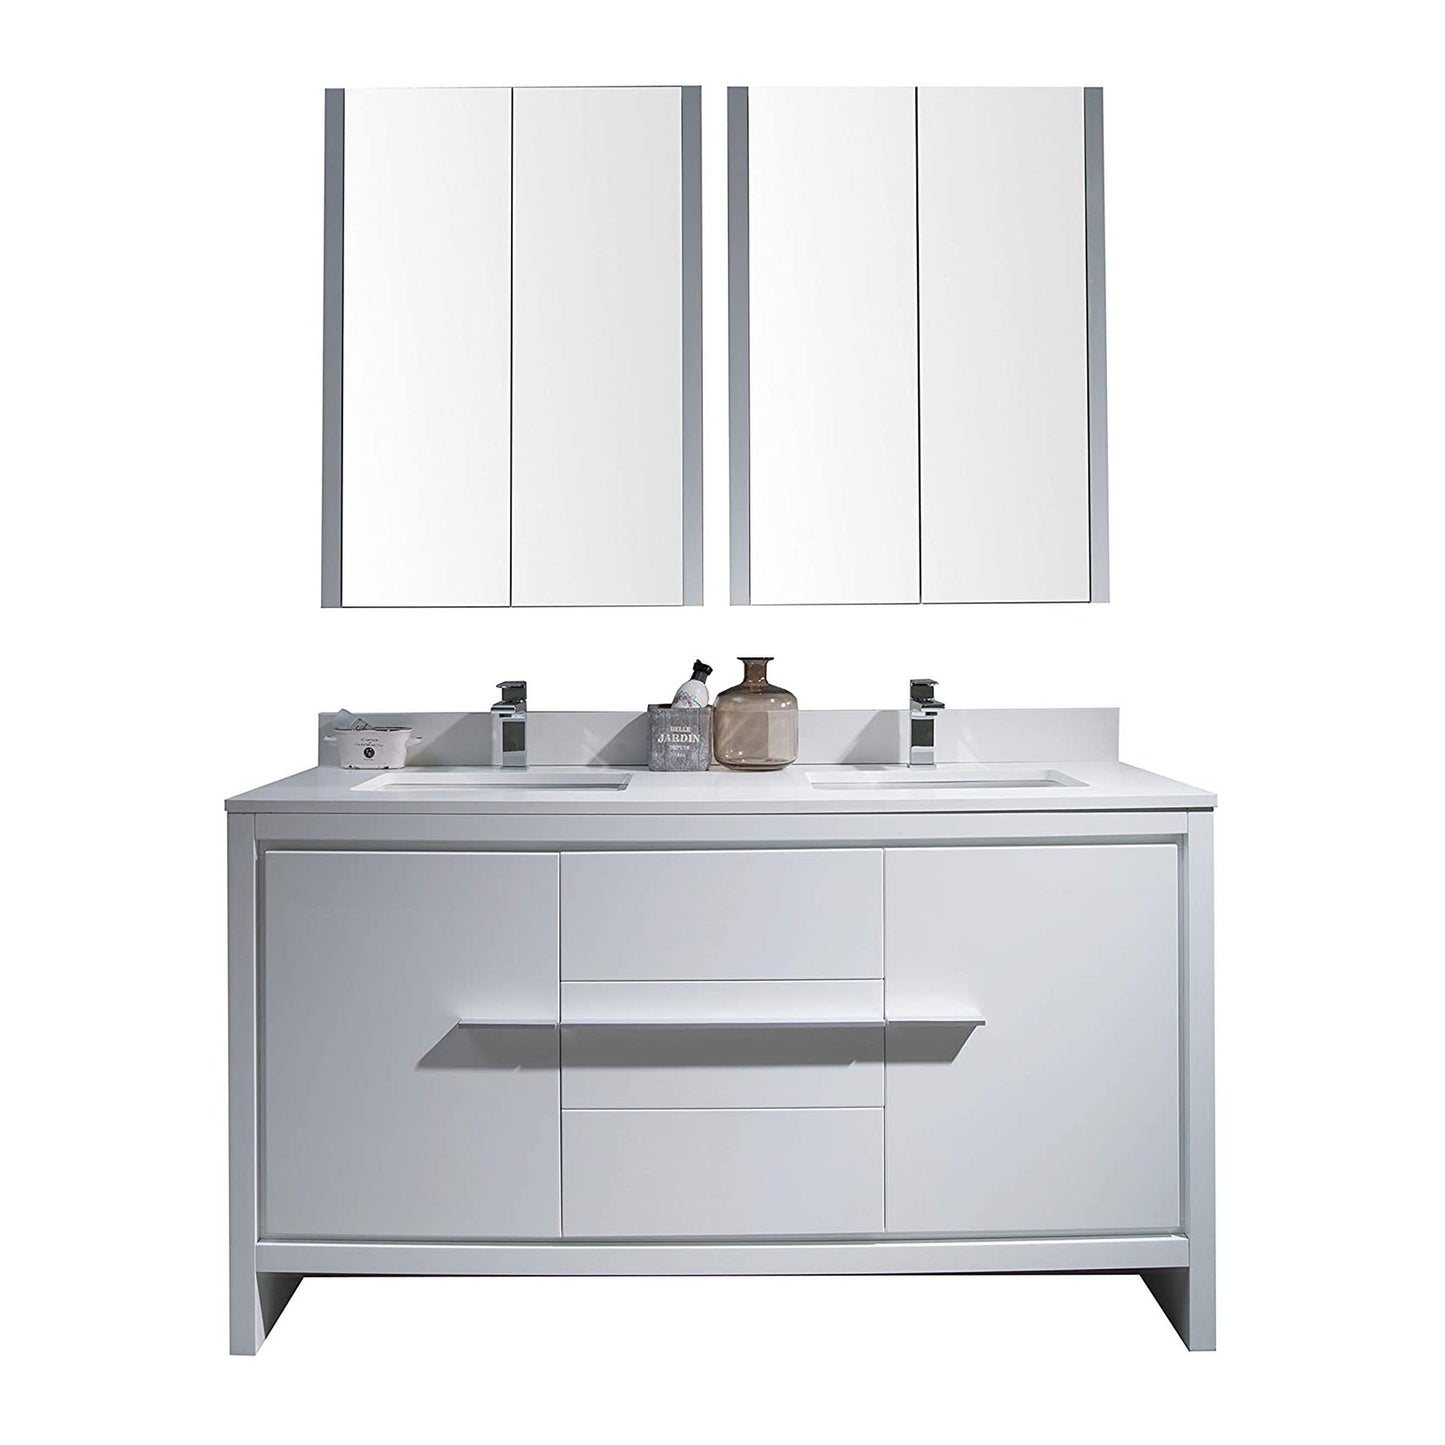 Blossom Milan 60" 2-Door 3-Drawer White Freestanding Vanity With Ceramic Drop-In Single Sink And Mirrored Medicine Cabinet